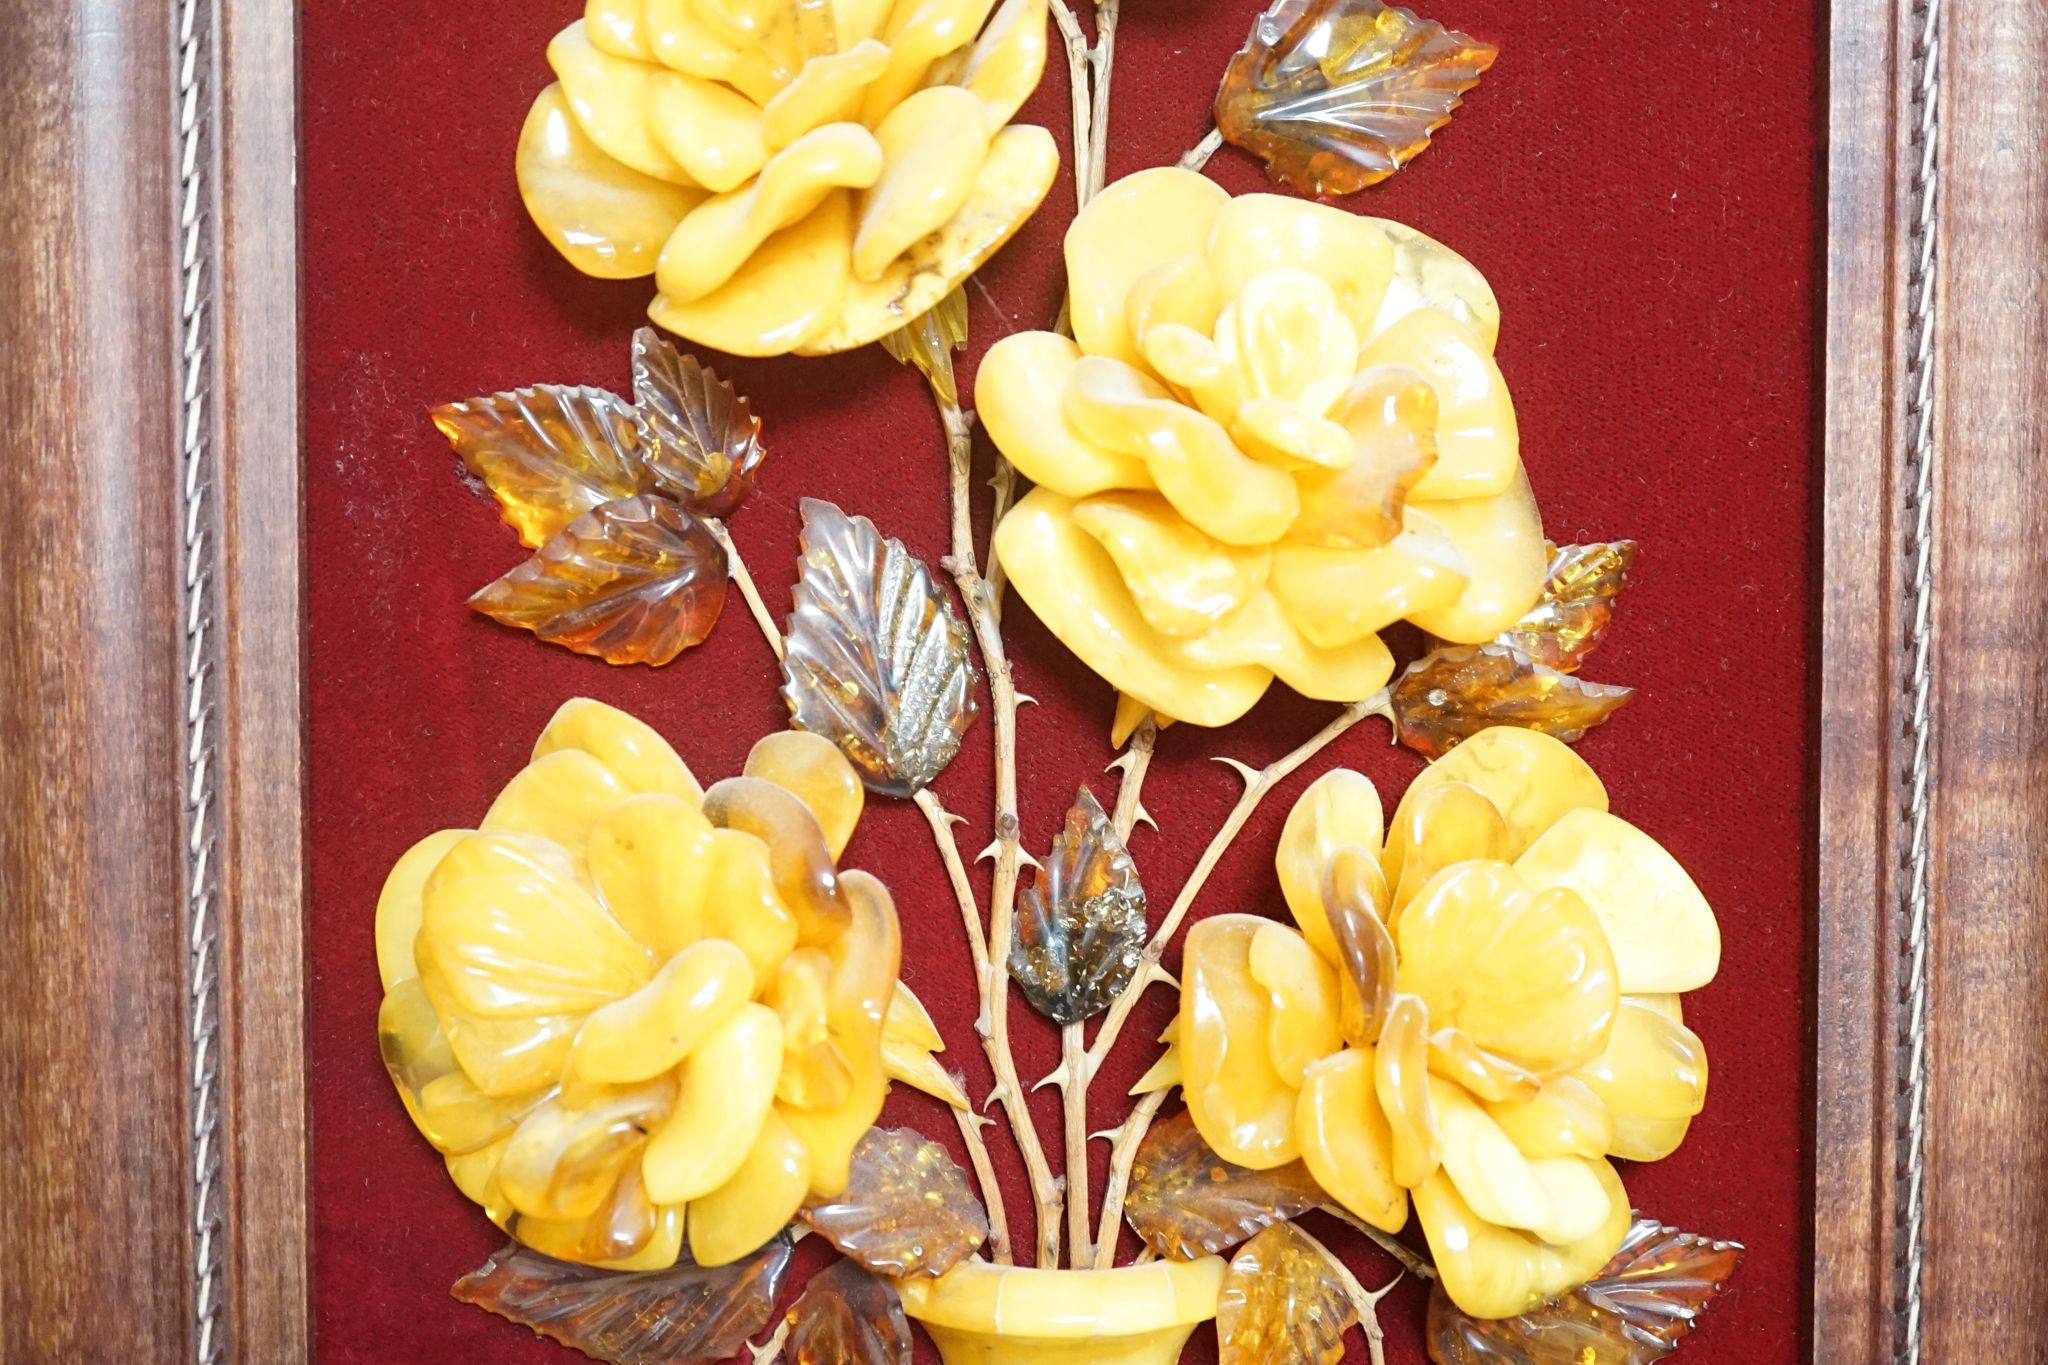 A carved amber panel from the Hermitage Museum shop, St Petersburg, roses in a vase. 49x39cm including frame